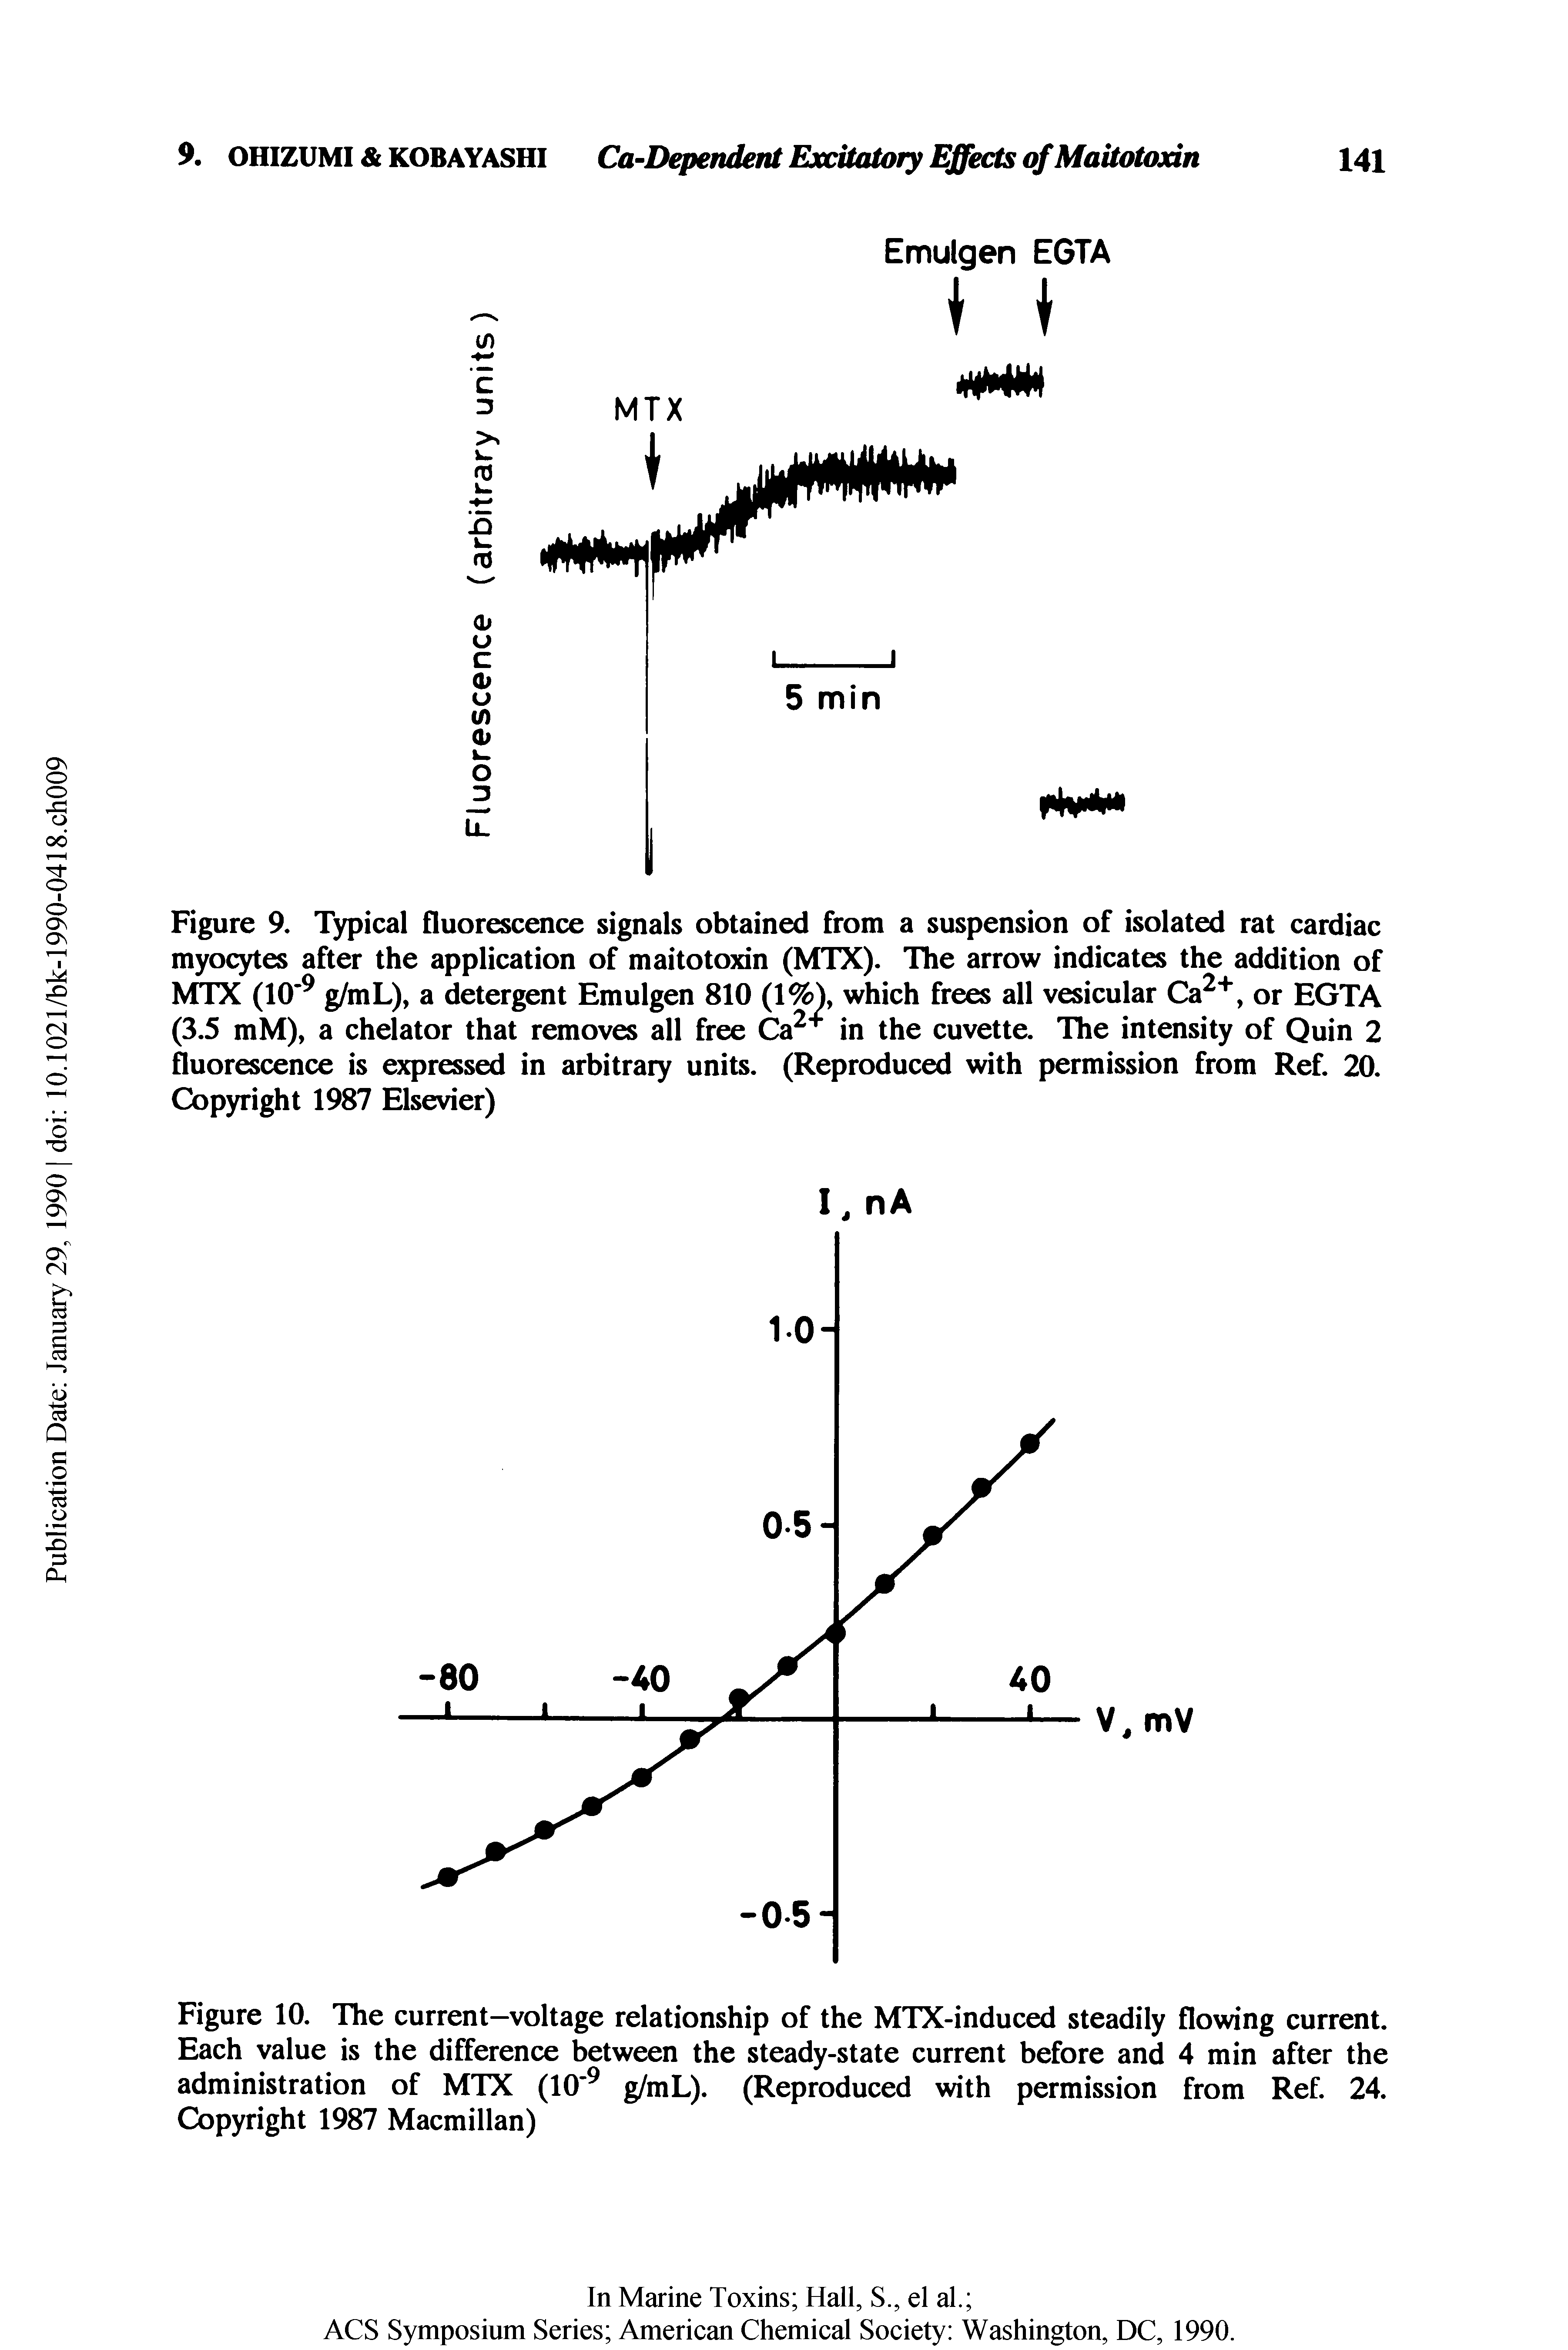 Figure 10. The current-voltage relationship of the MTX-induced steadily flowing current. Each value is the difference between the steady-state current before and 4 min after the administration of MTX (10 g/mL). (Reproduced with permission from Ref. 24. Copyright 1987 Macmillan)...